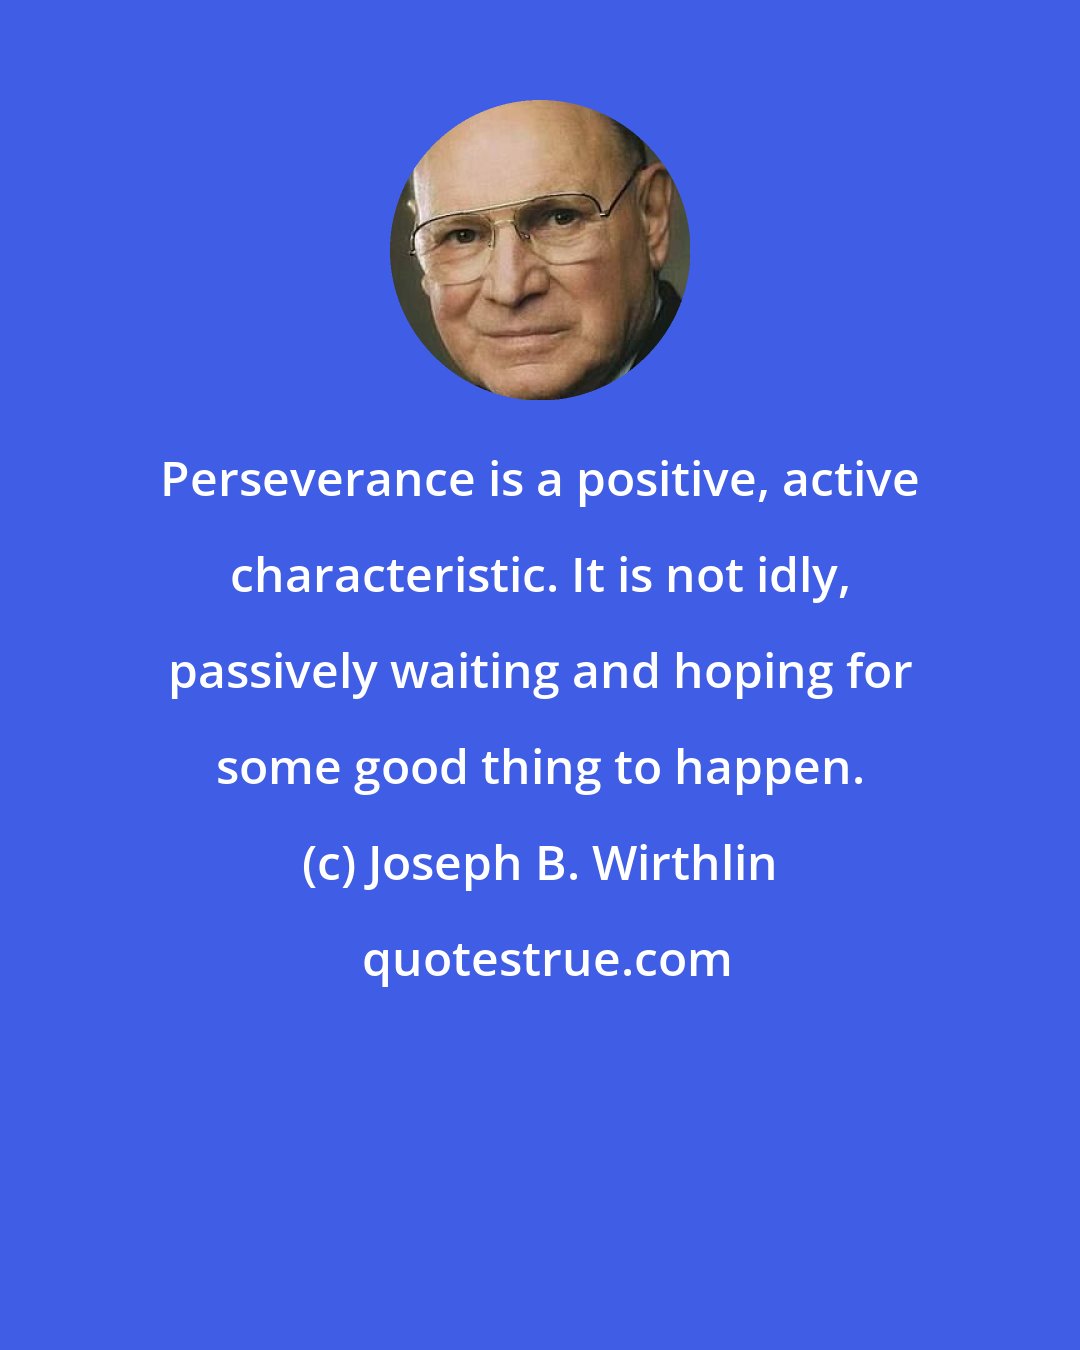 Joseph B. Wirthlin: Perseverance is a positive, active characteristic. It is not idly, passively waiting and hoping for some good thing to happen.